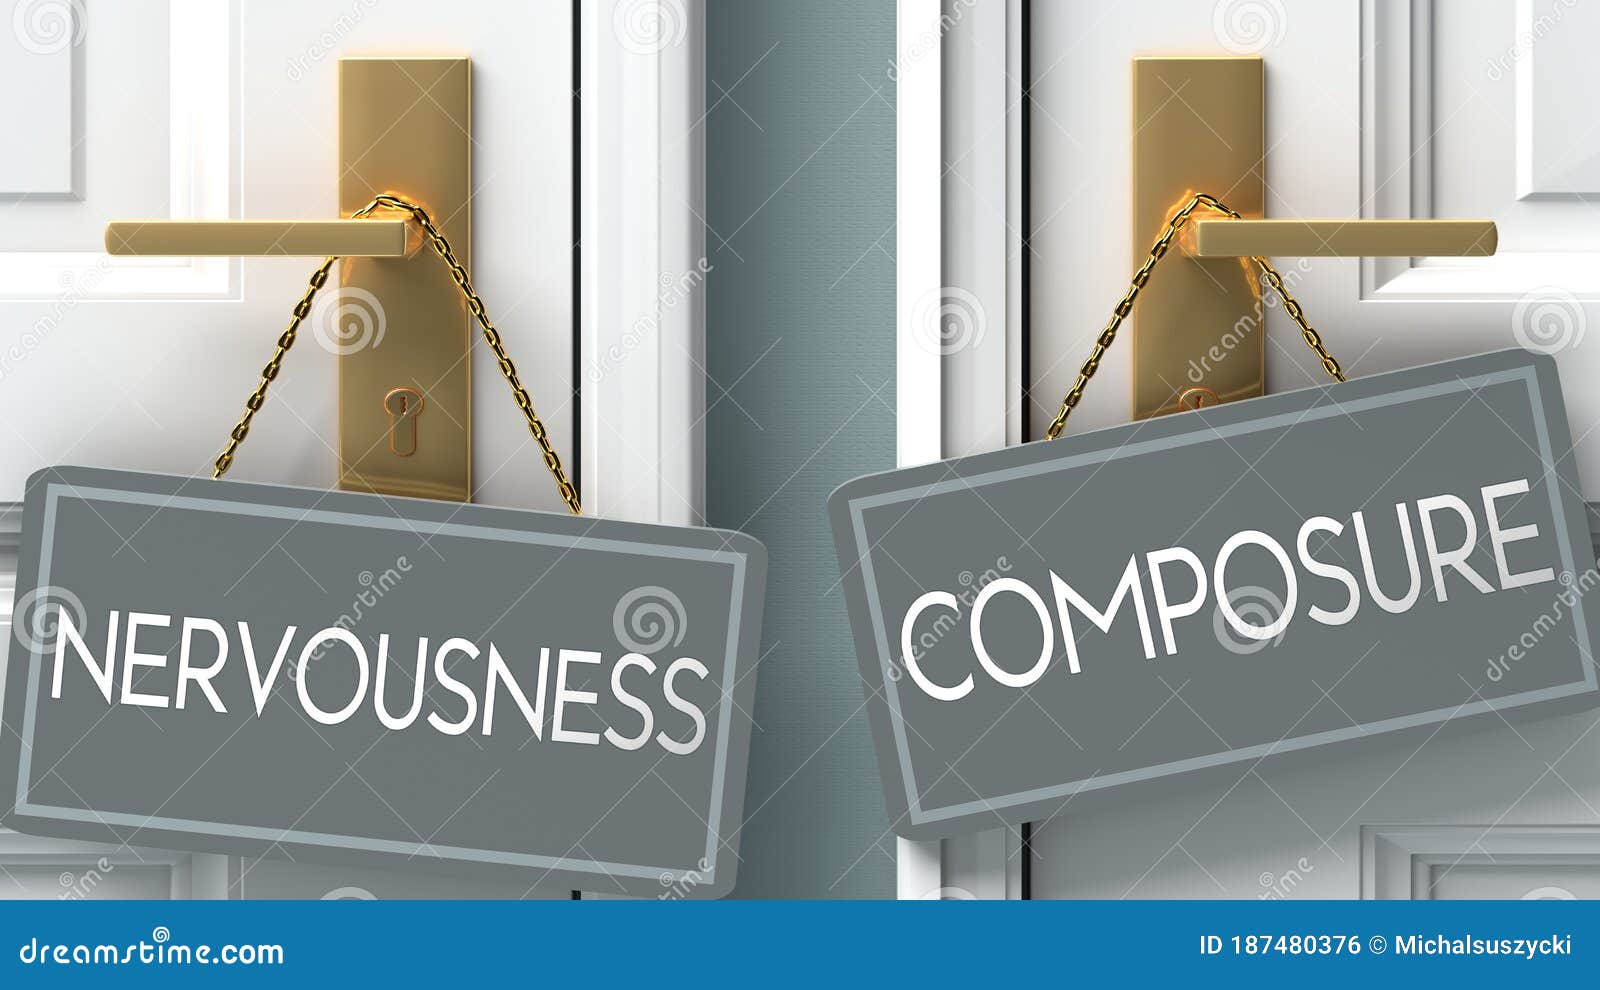 composure or nervousness as a choice in life - pictured as words nervousness, composure on doors to show that nervousness and